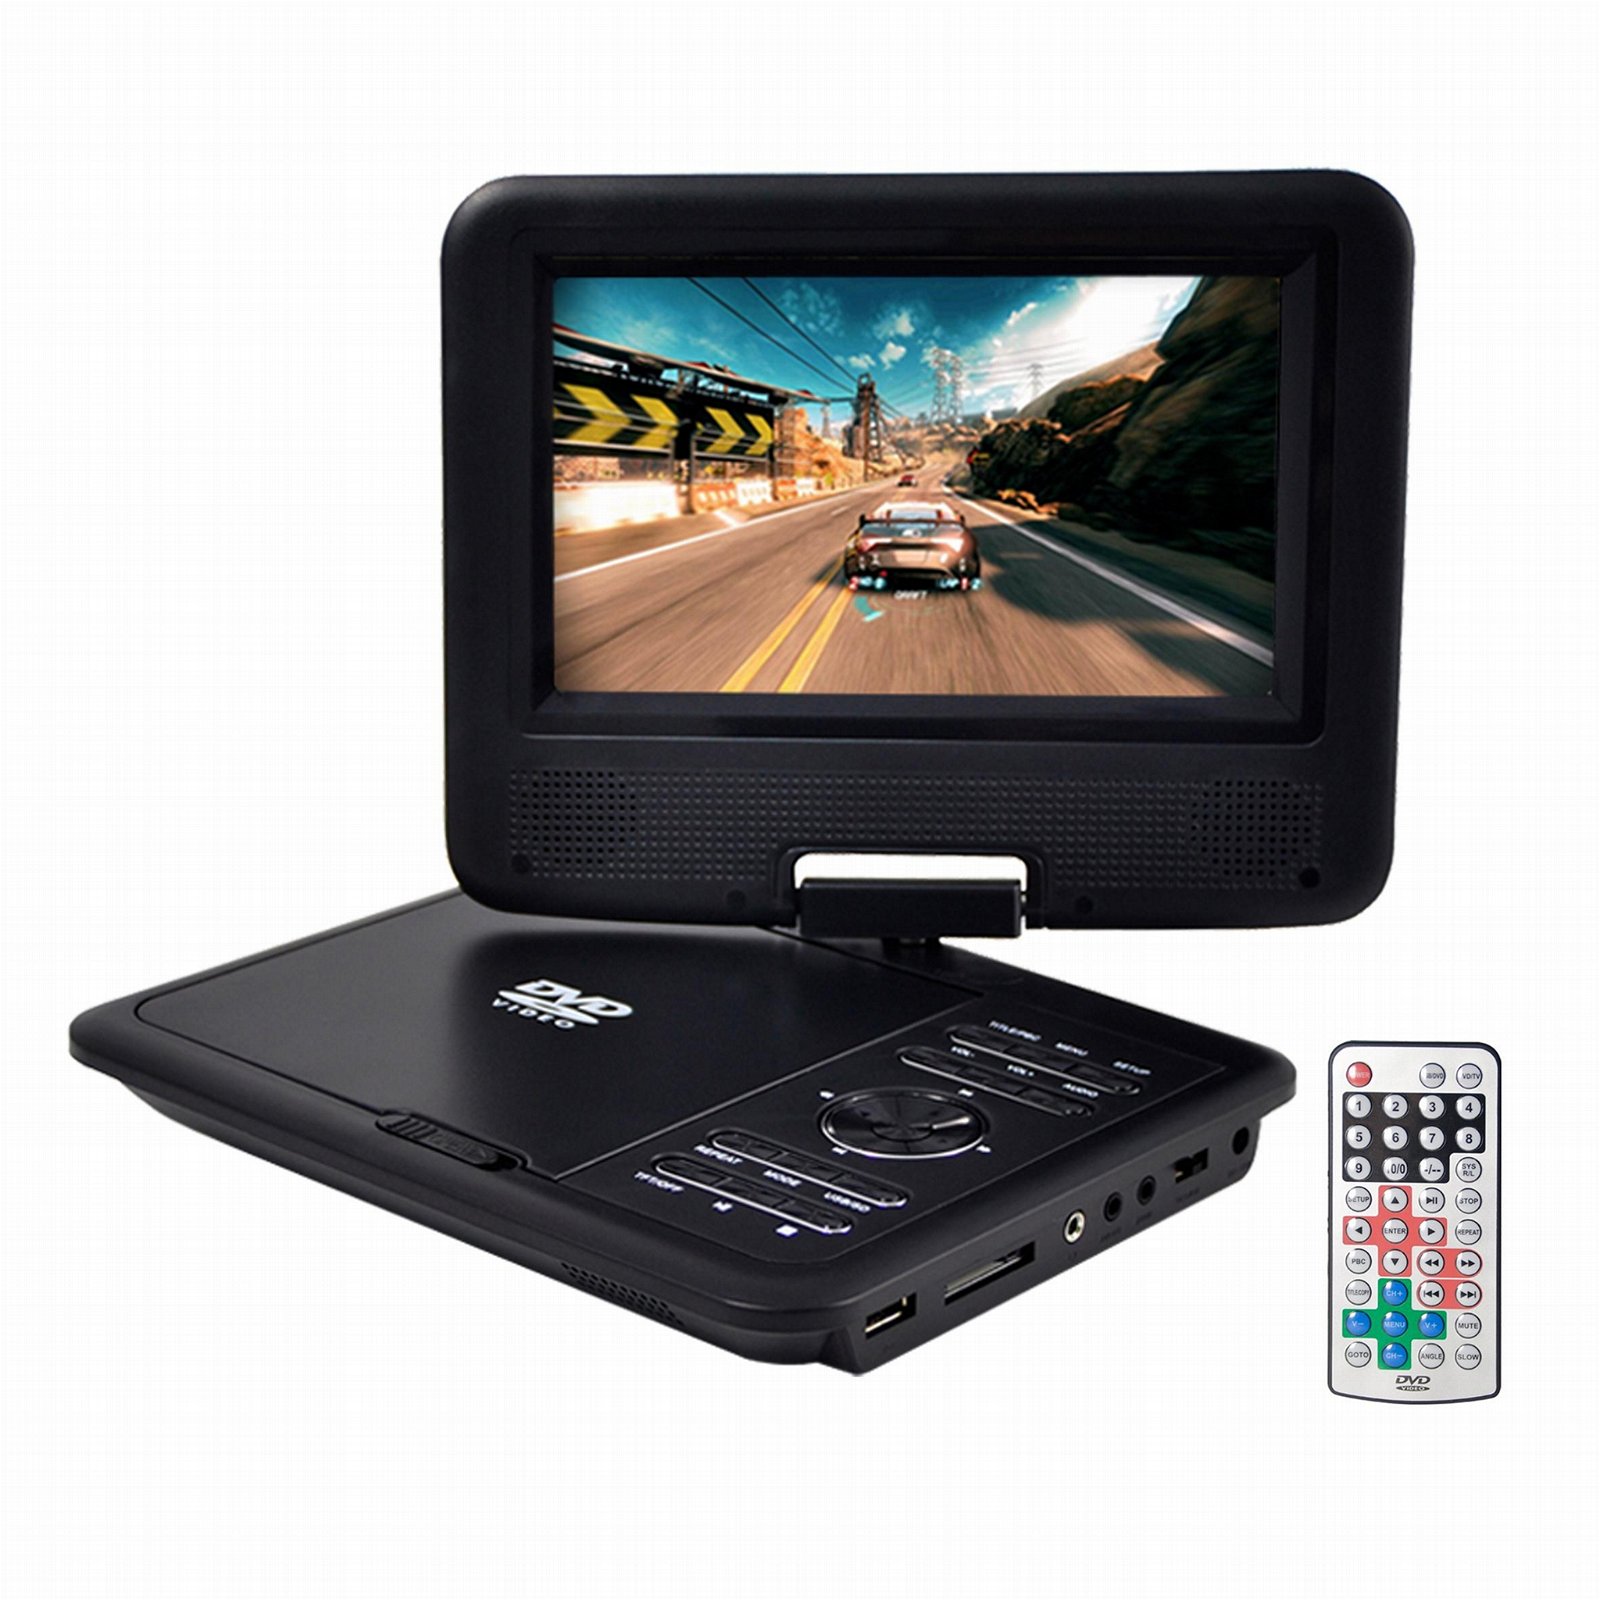 wholesale 7' portable dvd player video format - 750 - FJD (China ...